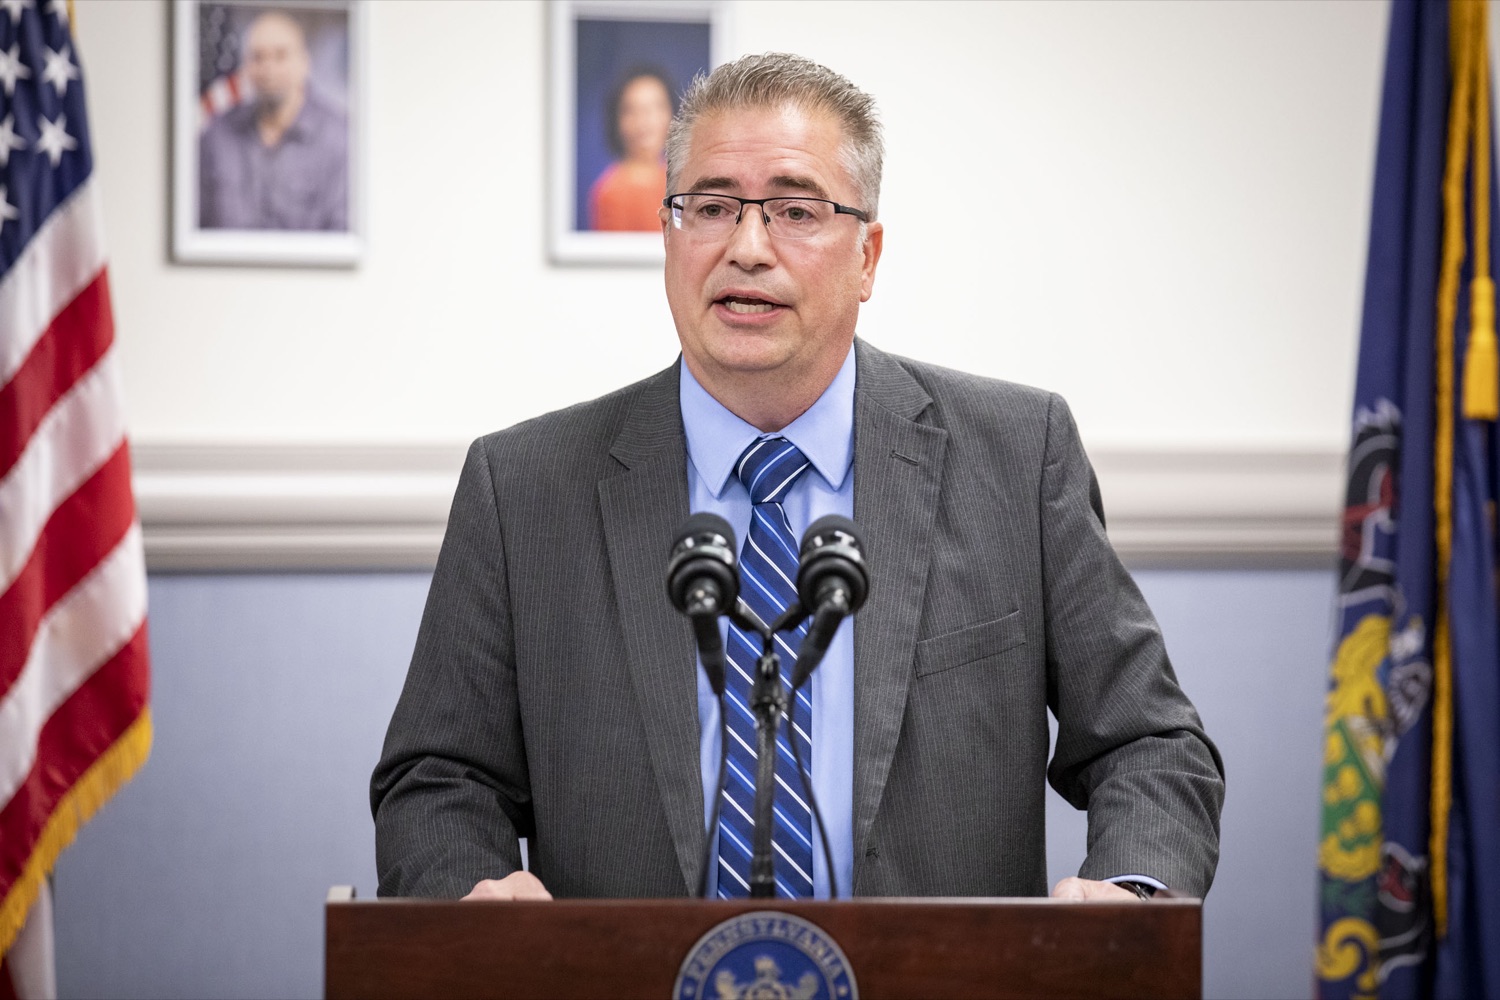 Risk Management Director Brent Lawson discusses enhancements to fight against fraudulent driver license or identification cards being produced or used, in Enola, PA on September 22, 2022.<br><a href="https://filesource.amperwave.net/commonwealthofpa/photo/22223_dot_security_cz_19.jpg" target="_blank">⇣ Download Photo</a>